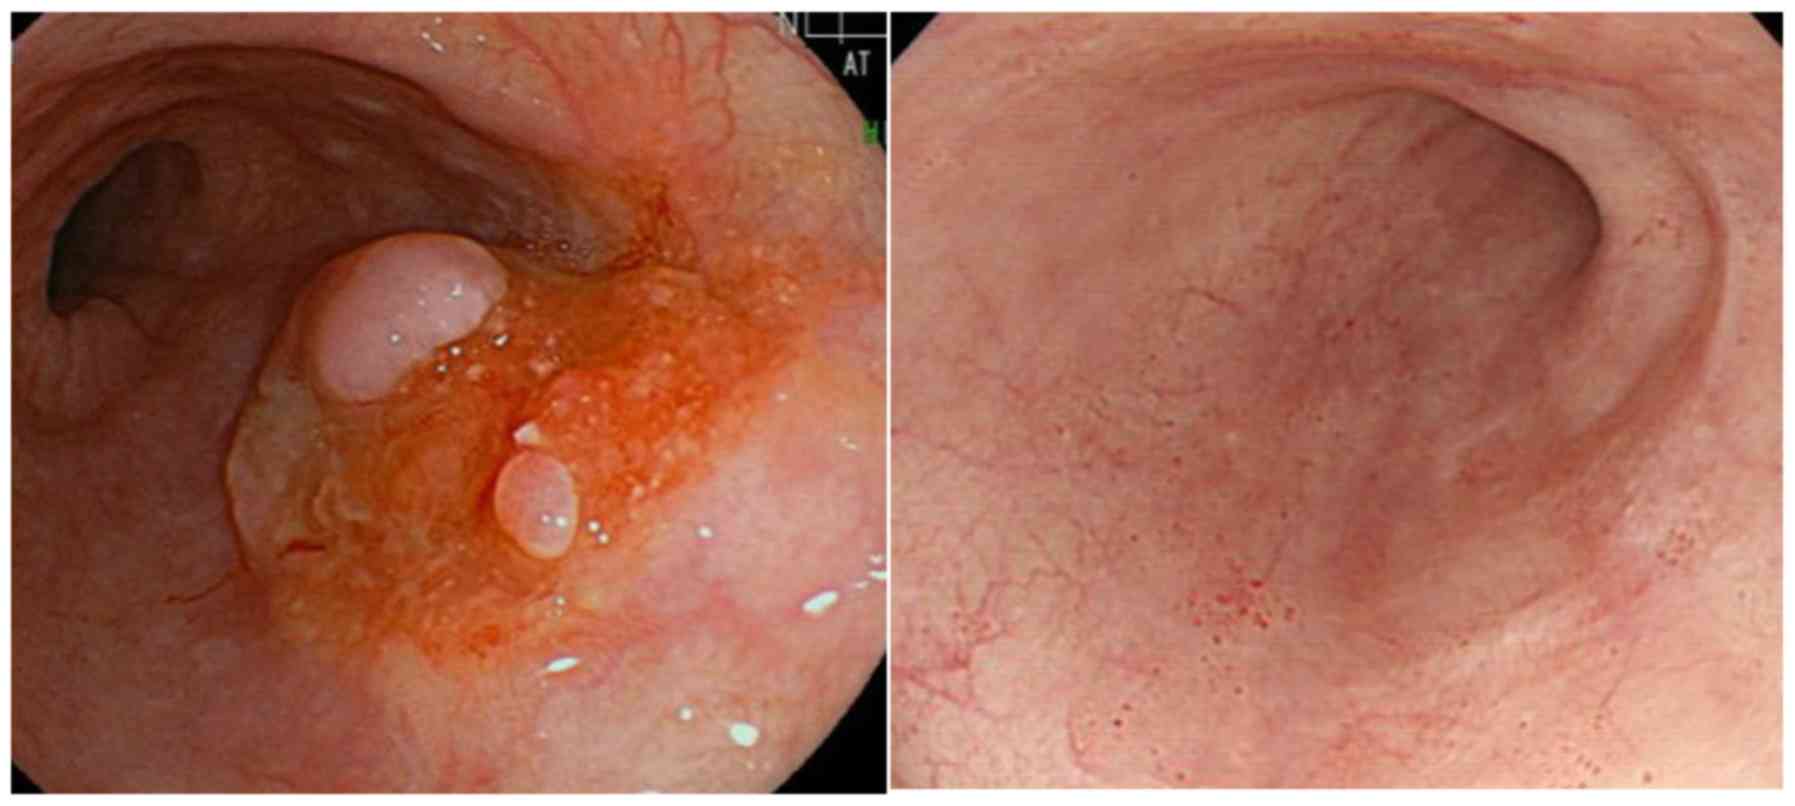 Chemoradiotherapy with FOLFOX for esophageal squamous cell